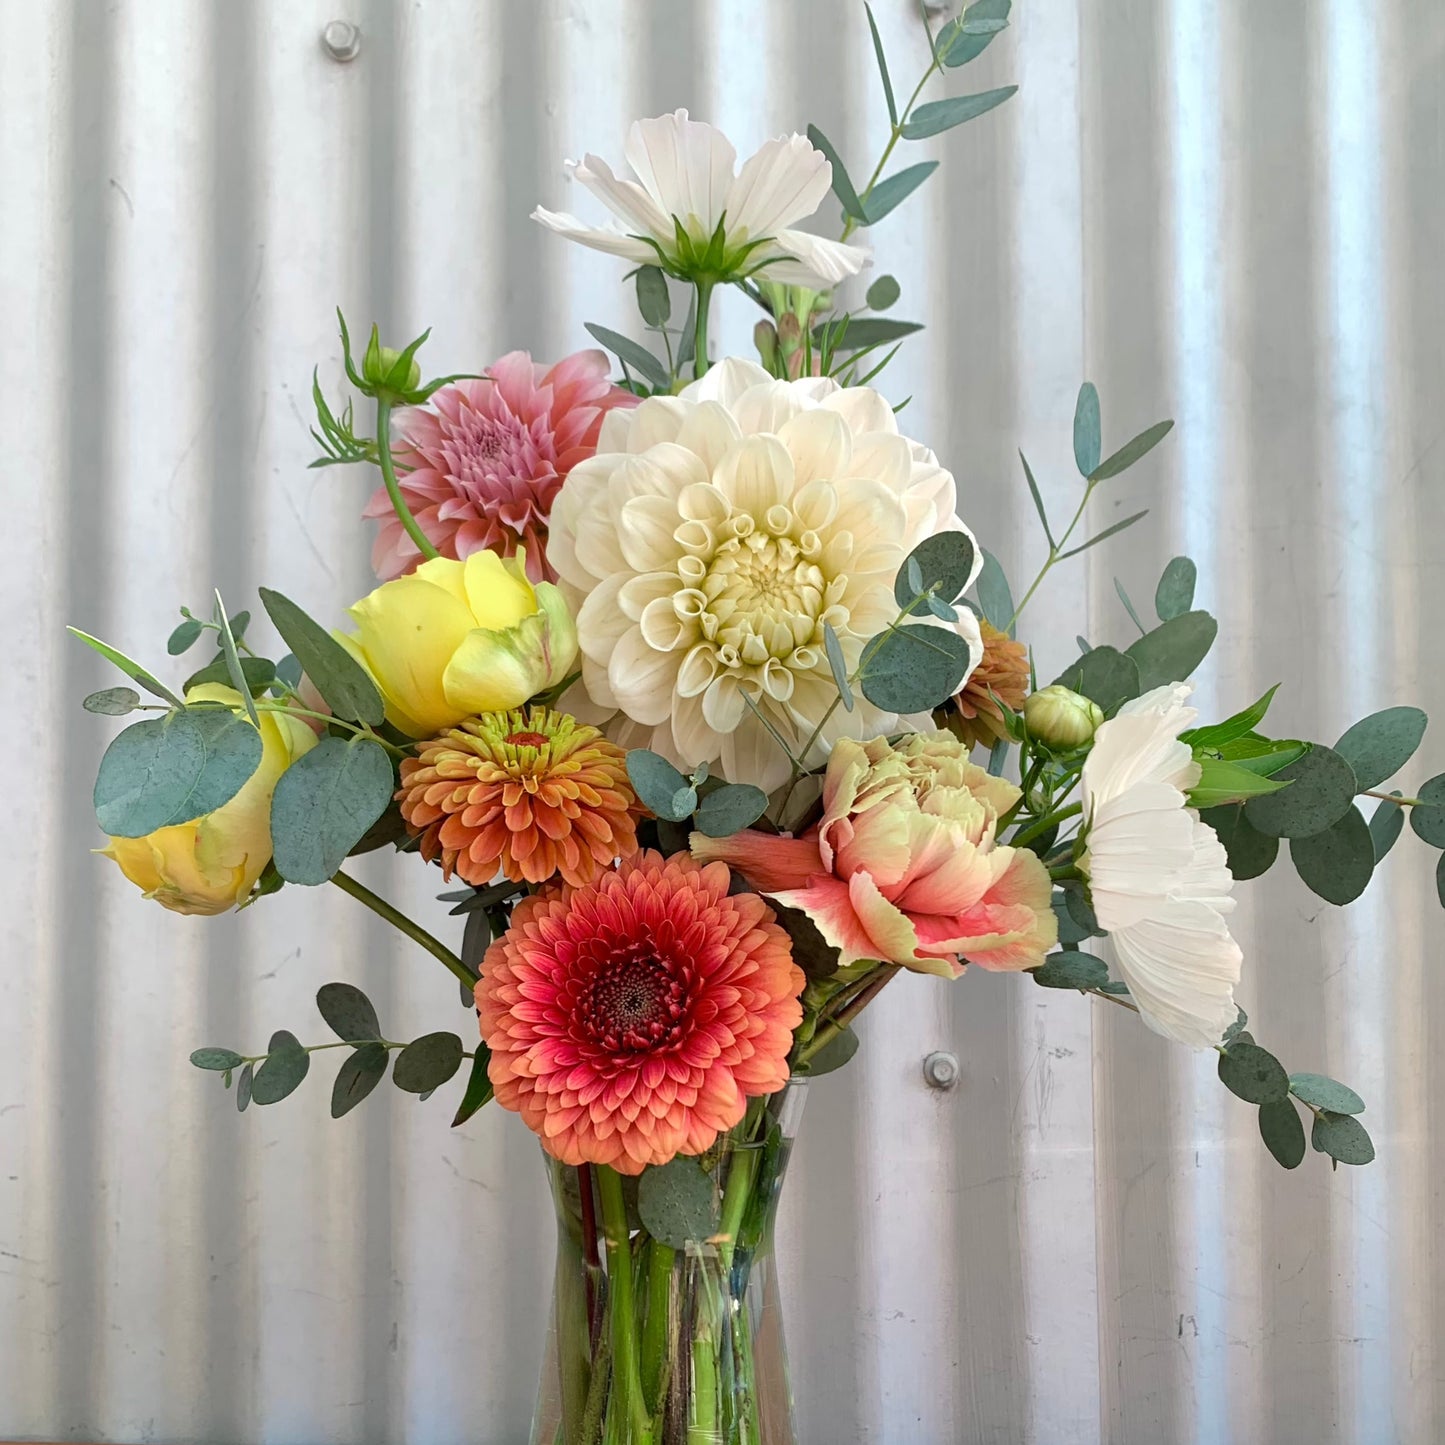 This week’s Best of Flor Bouquet